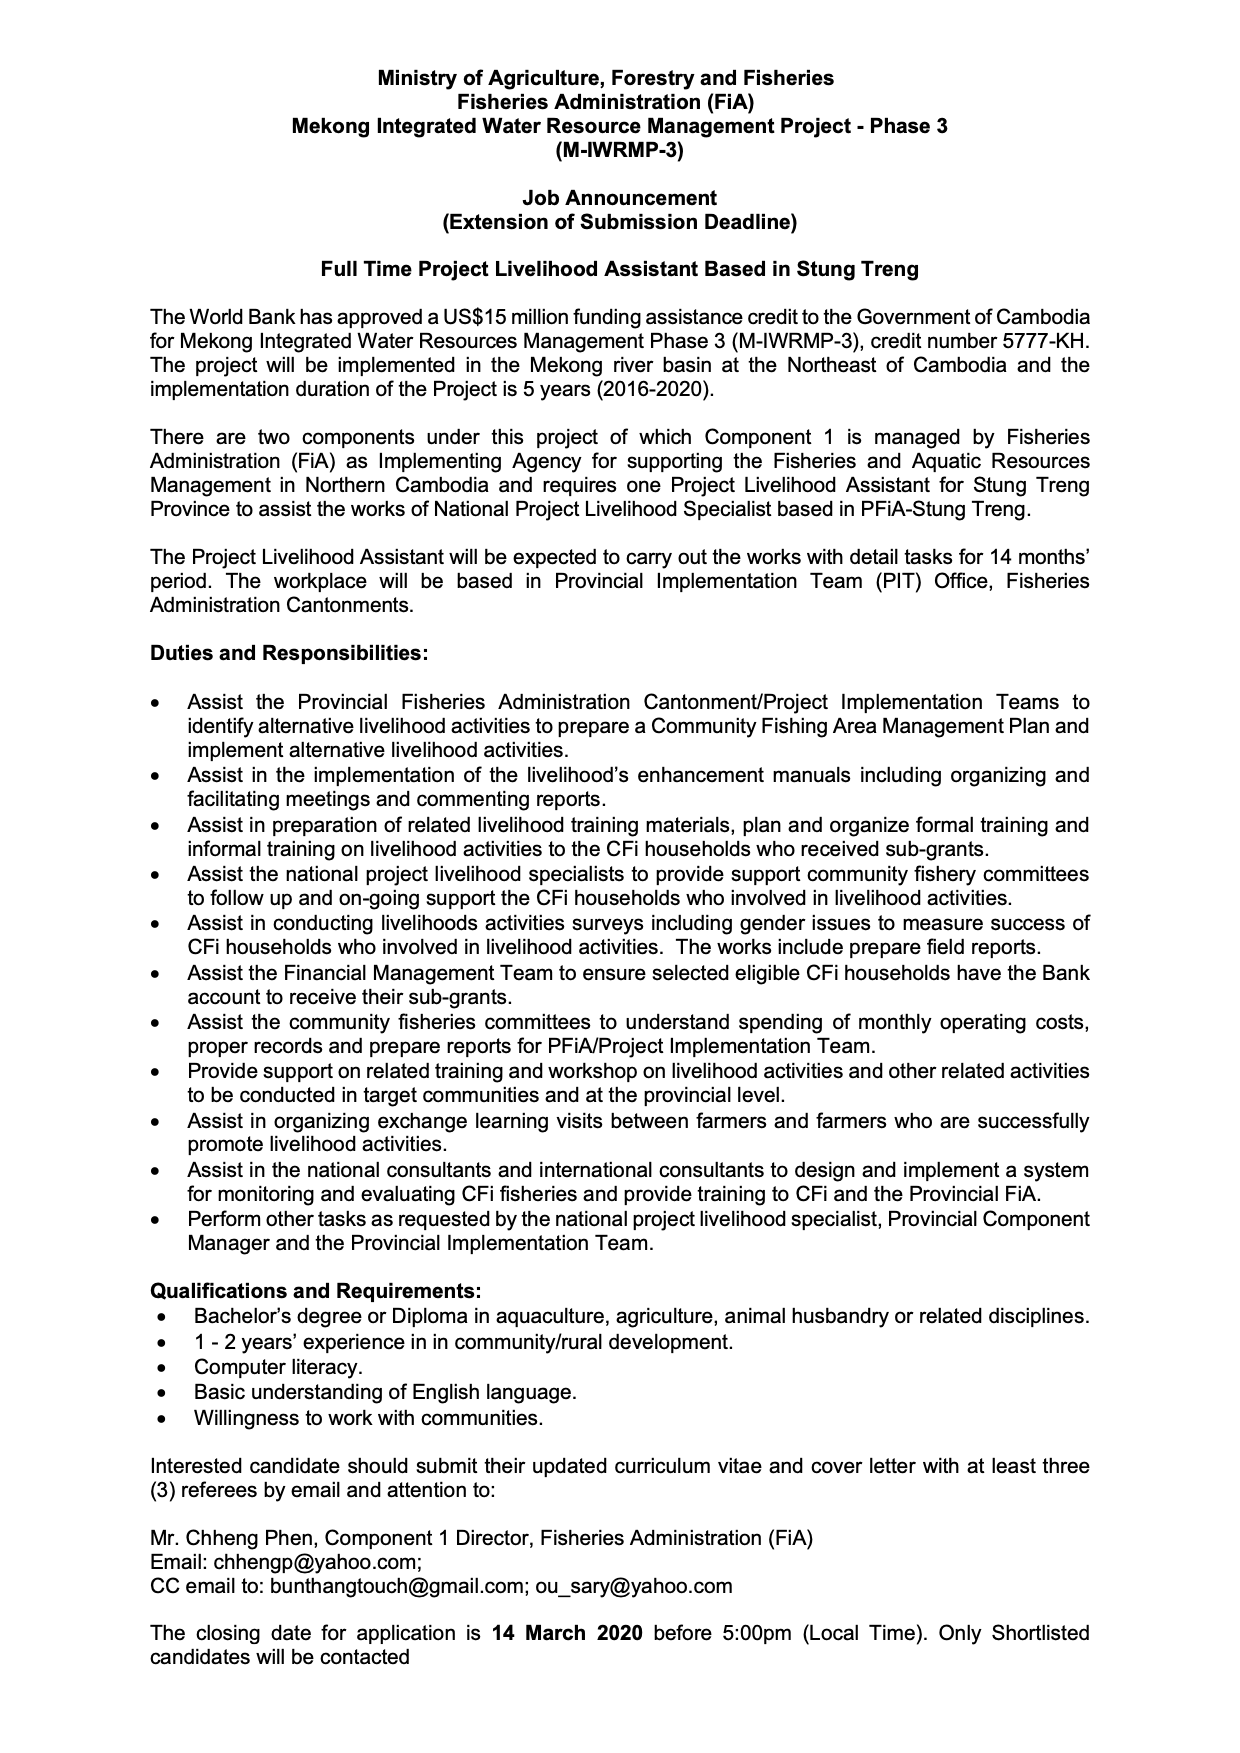 Full-Time Project Livelihood Assistant based in Stung Treng province